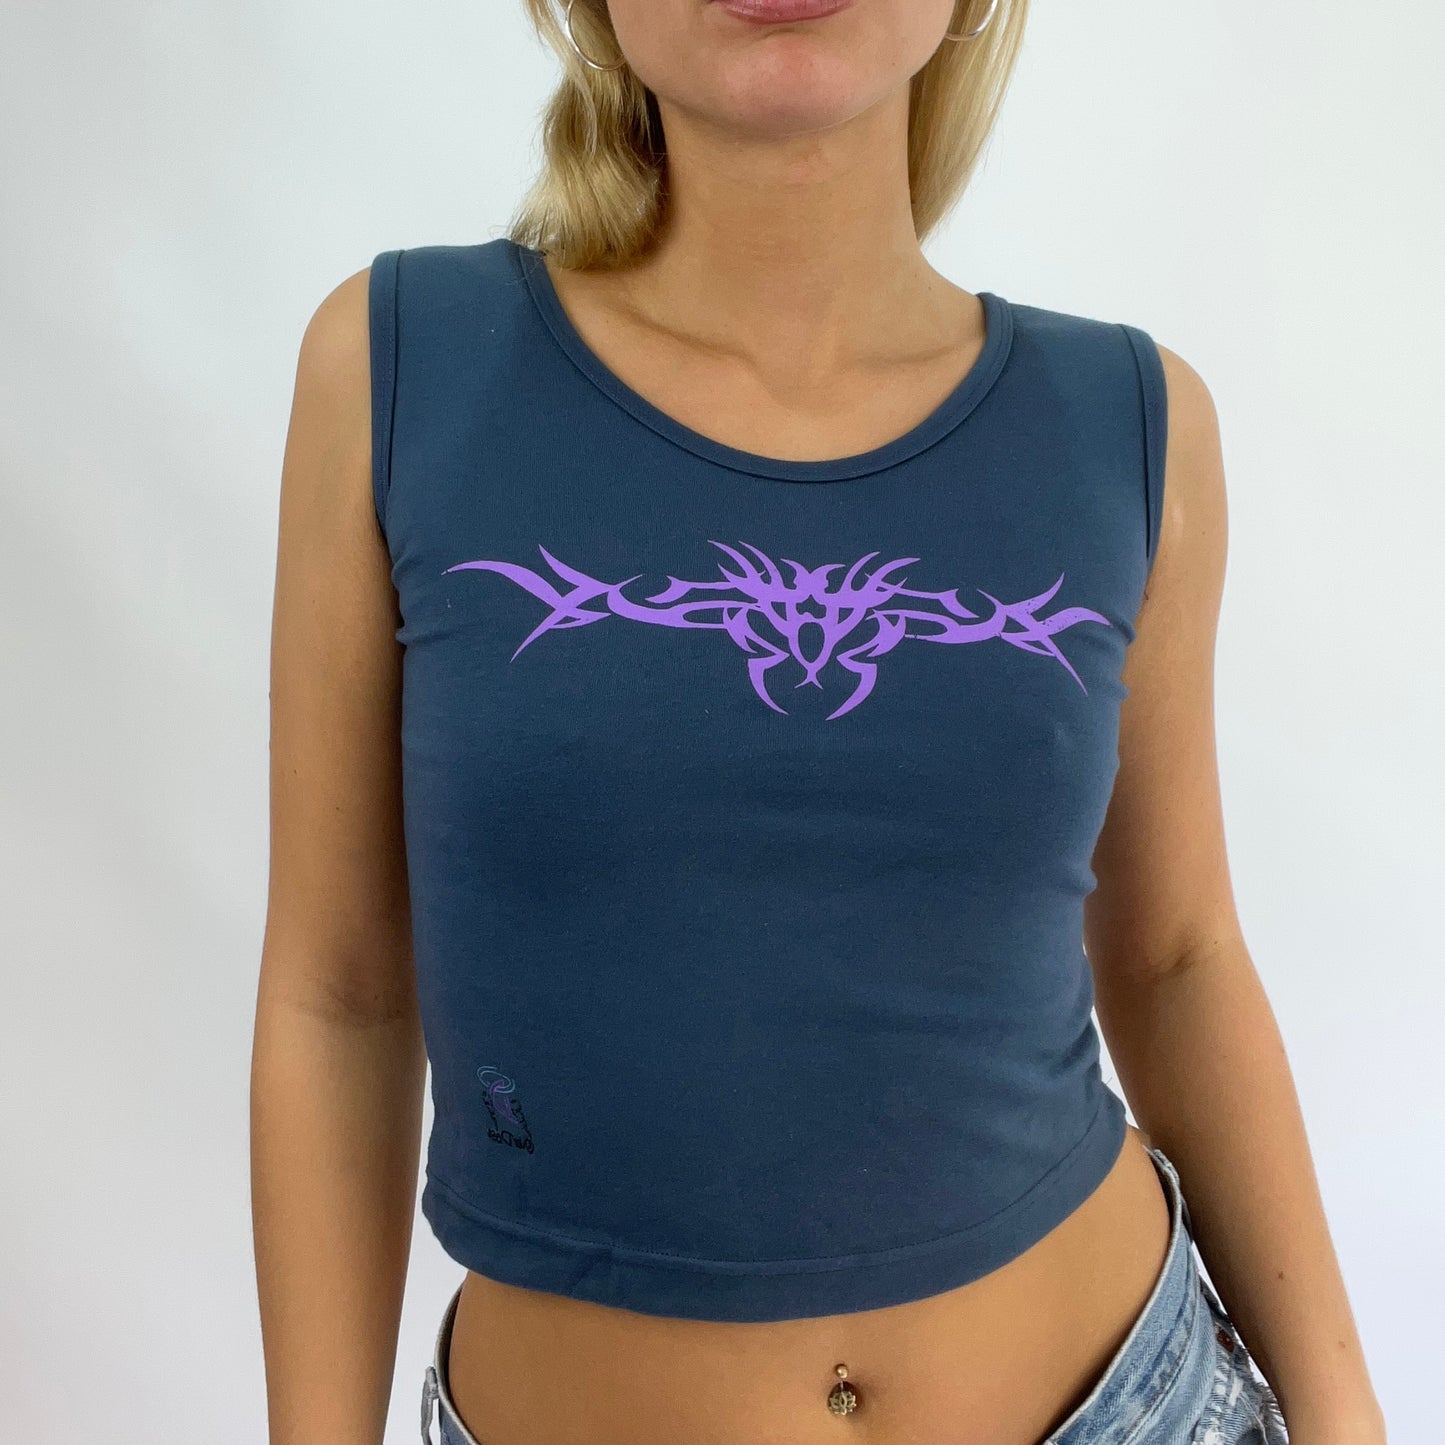 EUROPEAN SUMMER DROP | small blue and purple graphic tank top